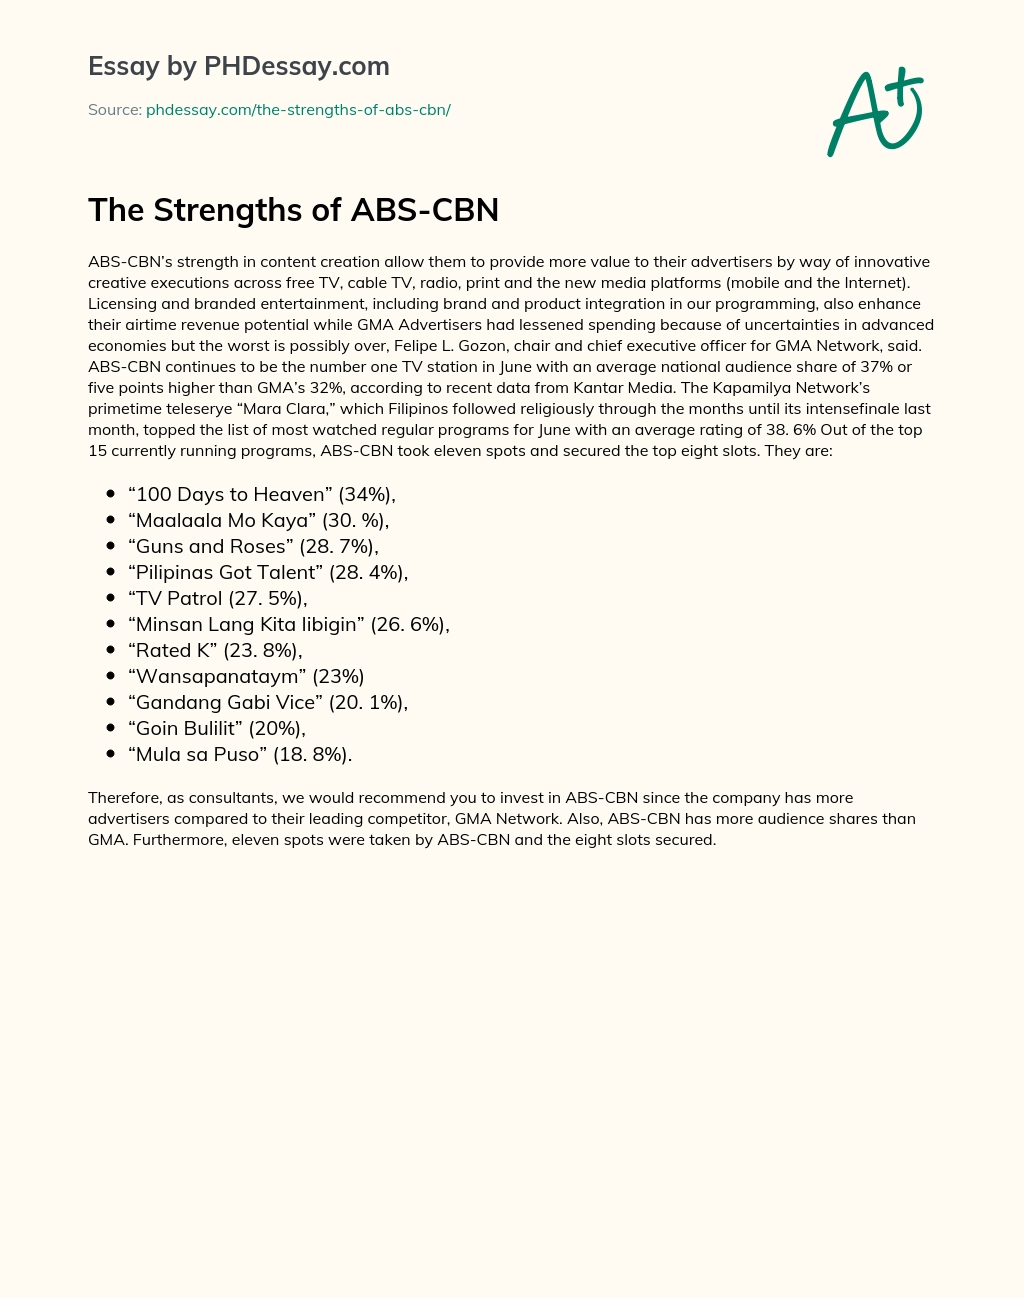 The Strengths of ABS-CBN essay